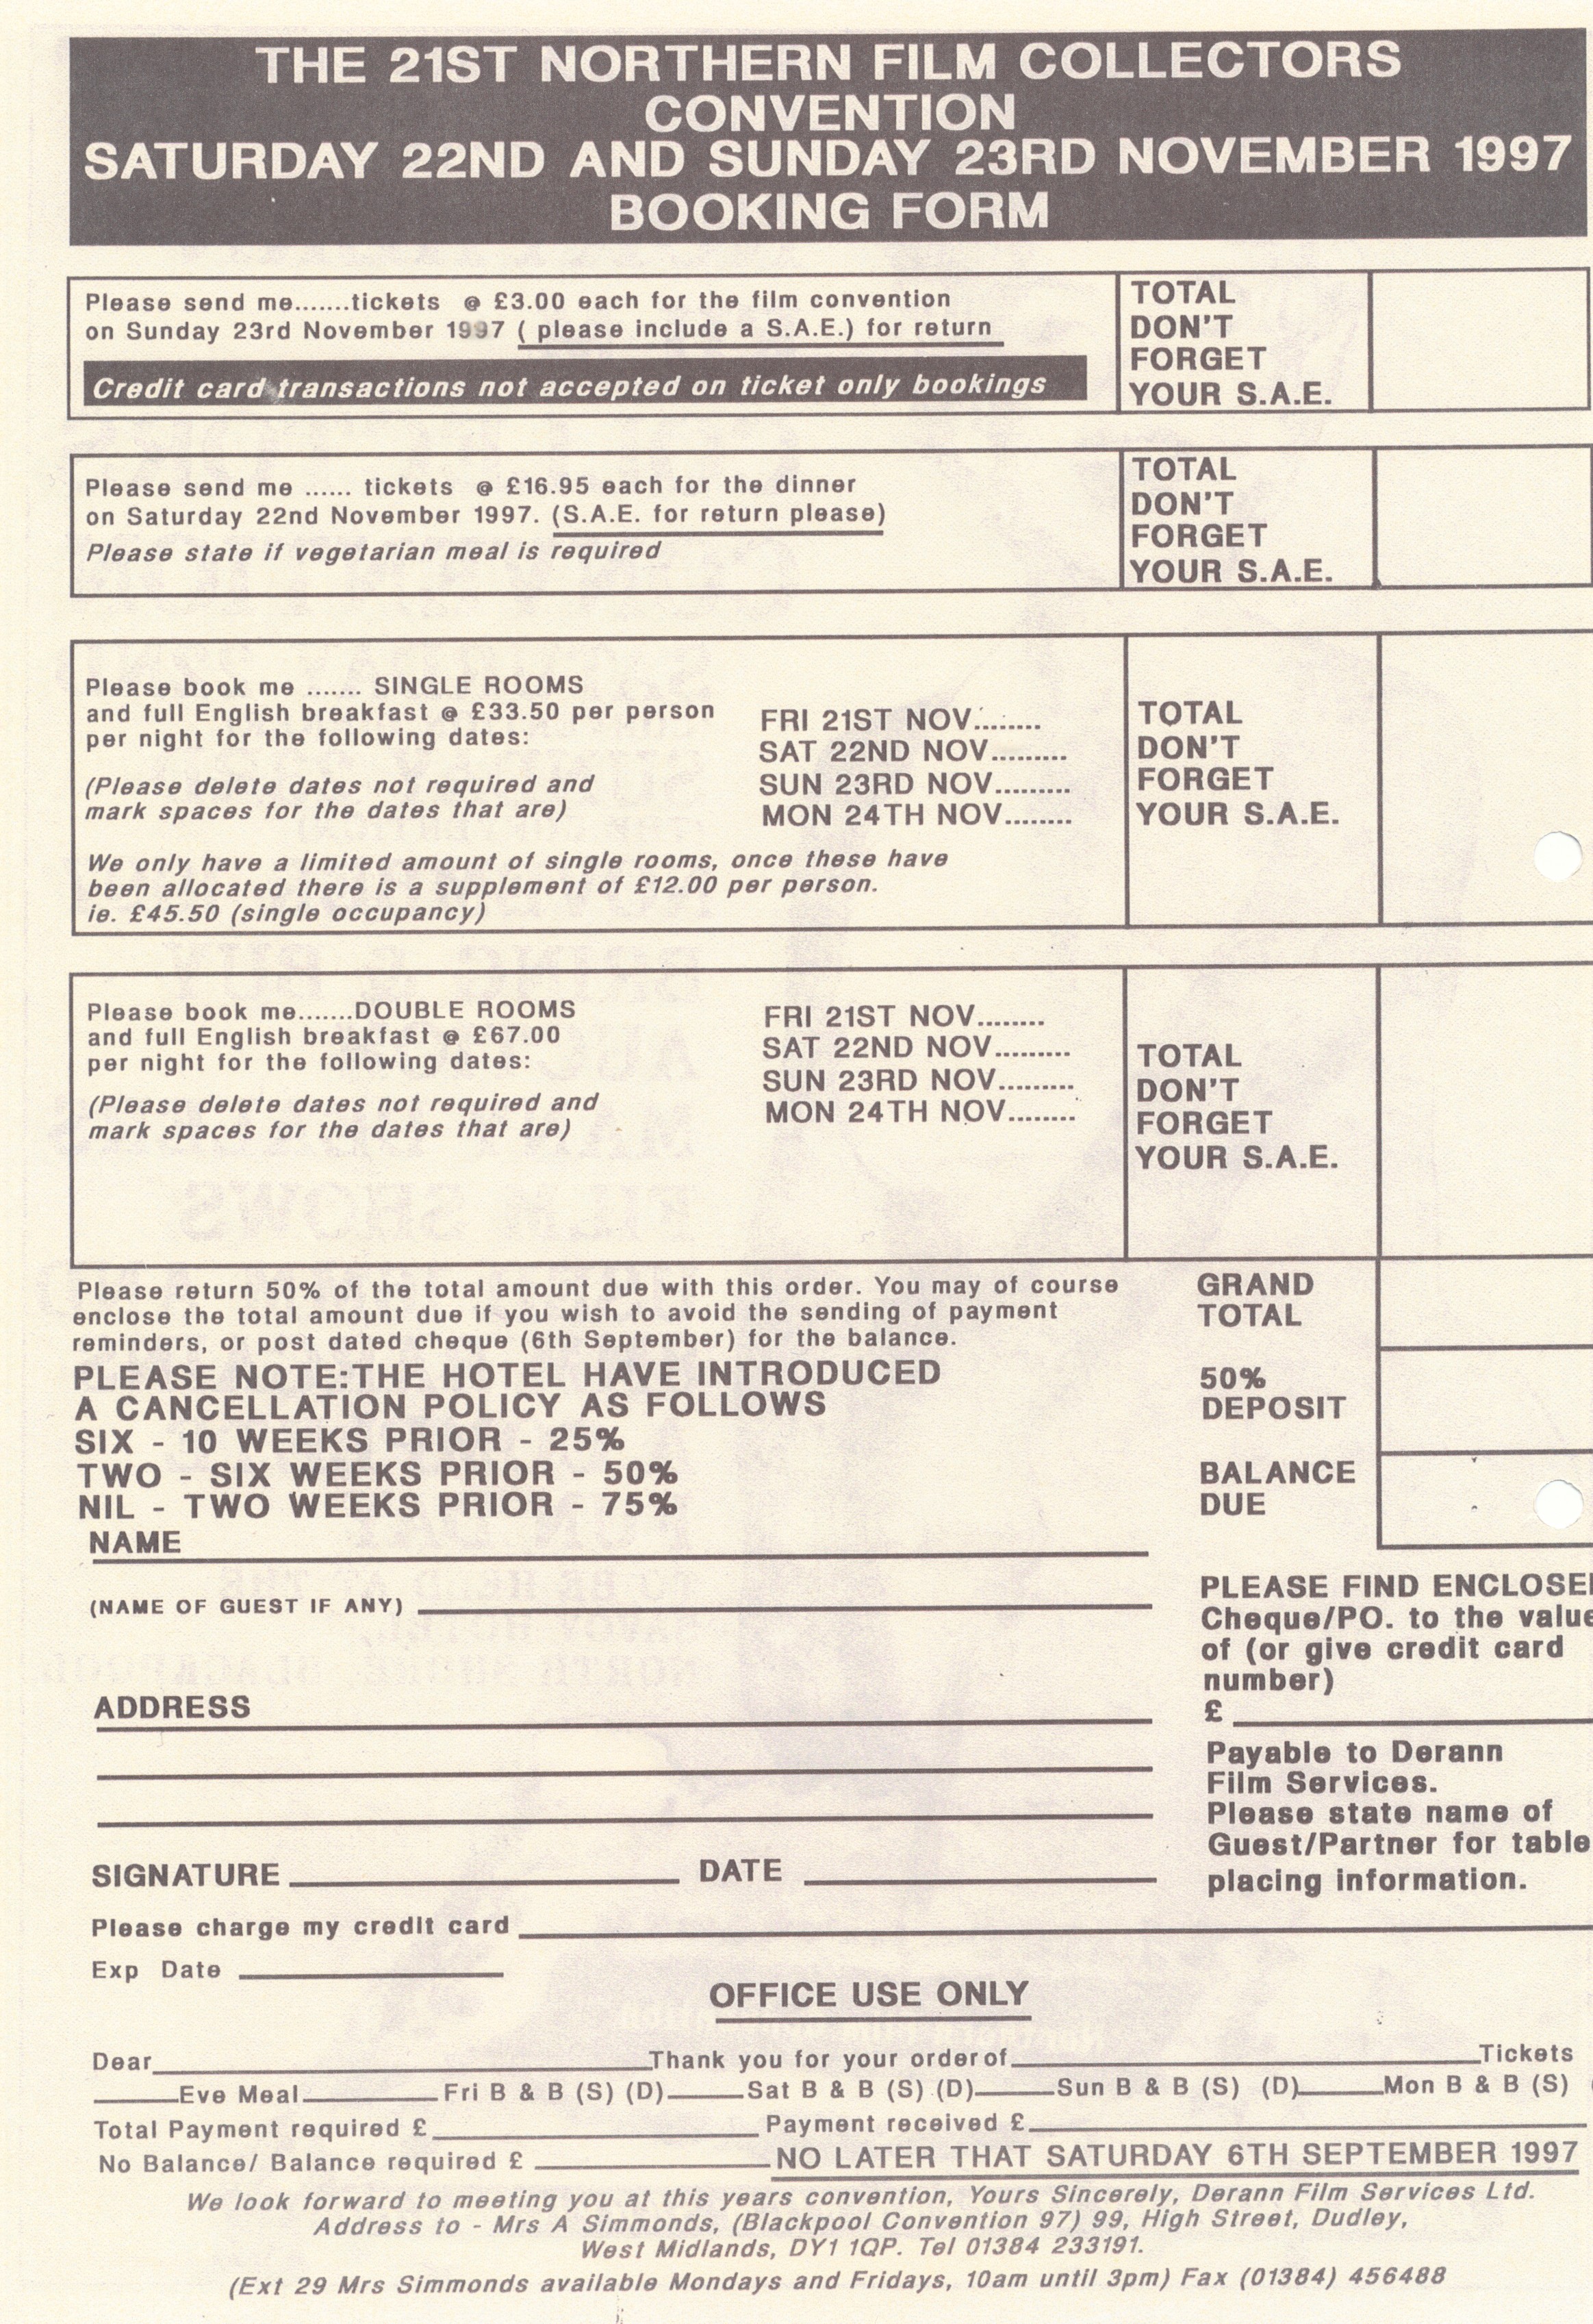 1997 Convention Booking Form